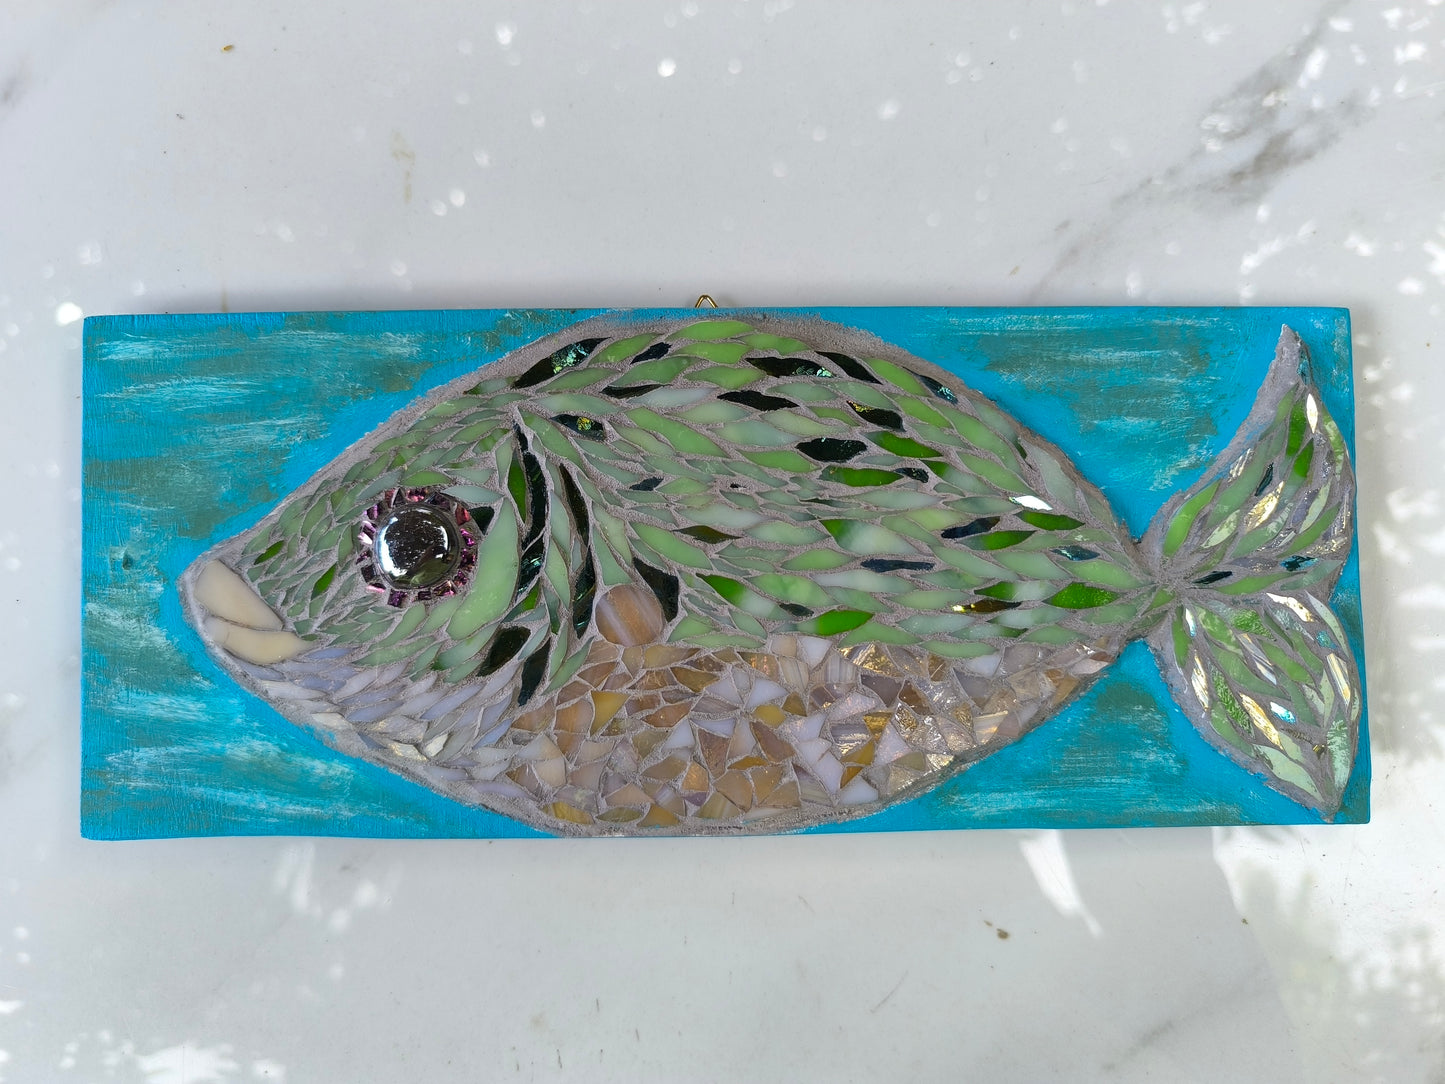 GREEN FISH IN TURQUOIZE WATERS